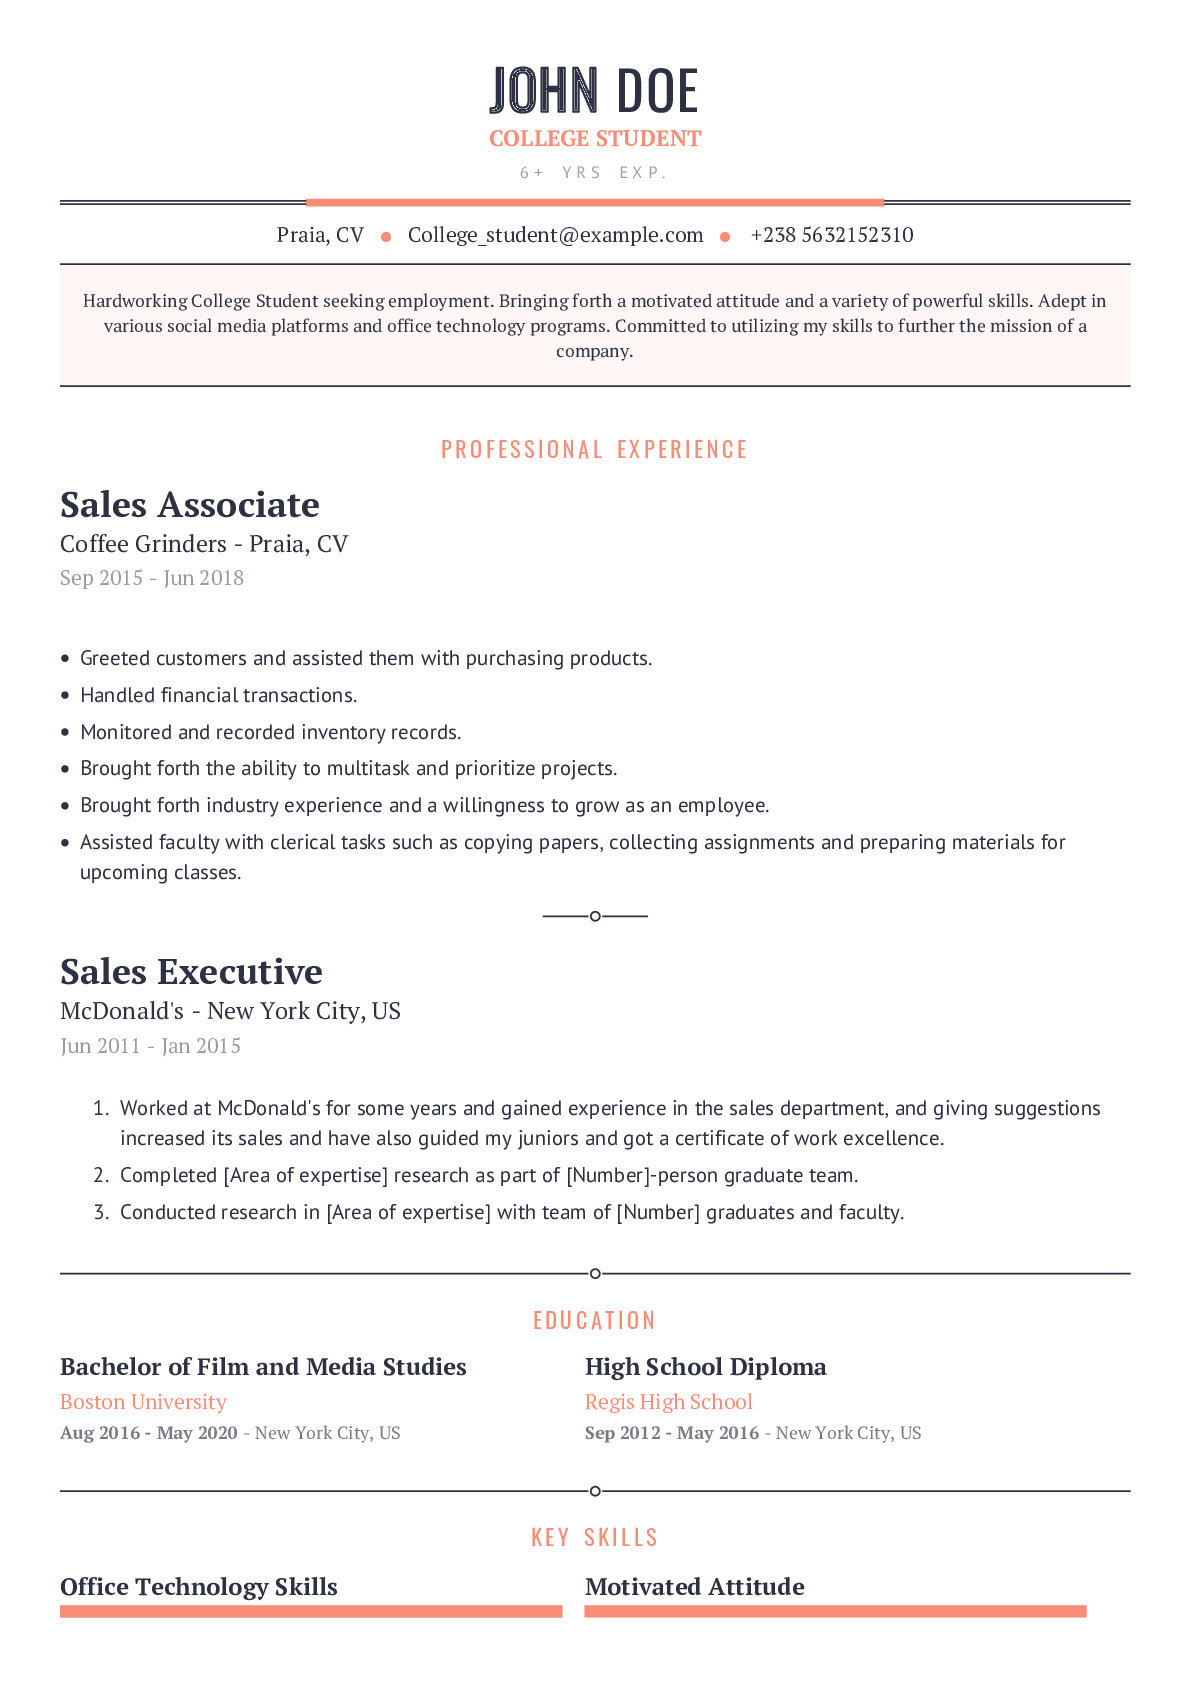 Sample Resume for Currently attenting College Student College Student Resume Example with Content Sample Craftmycv